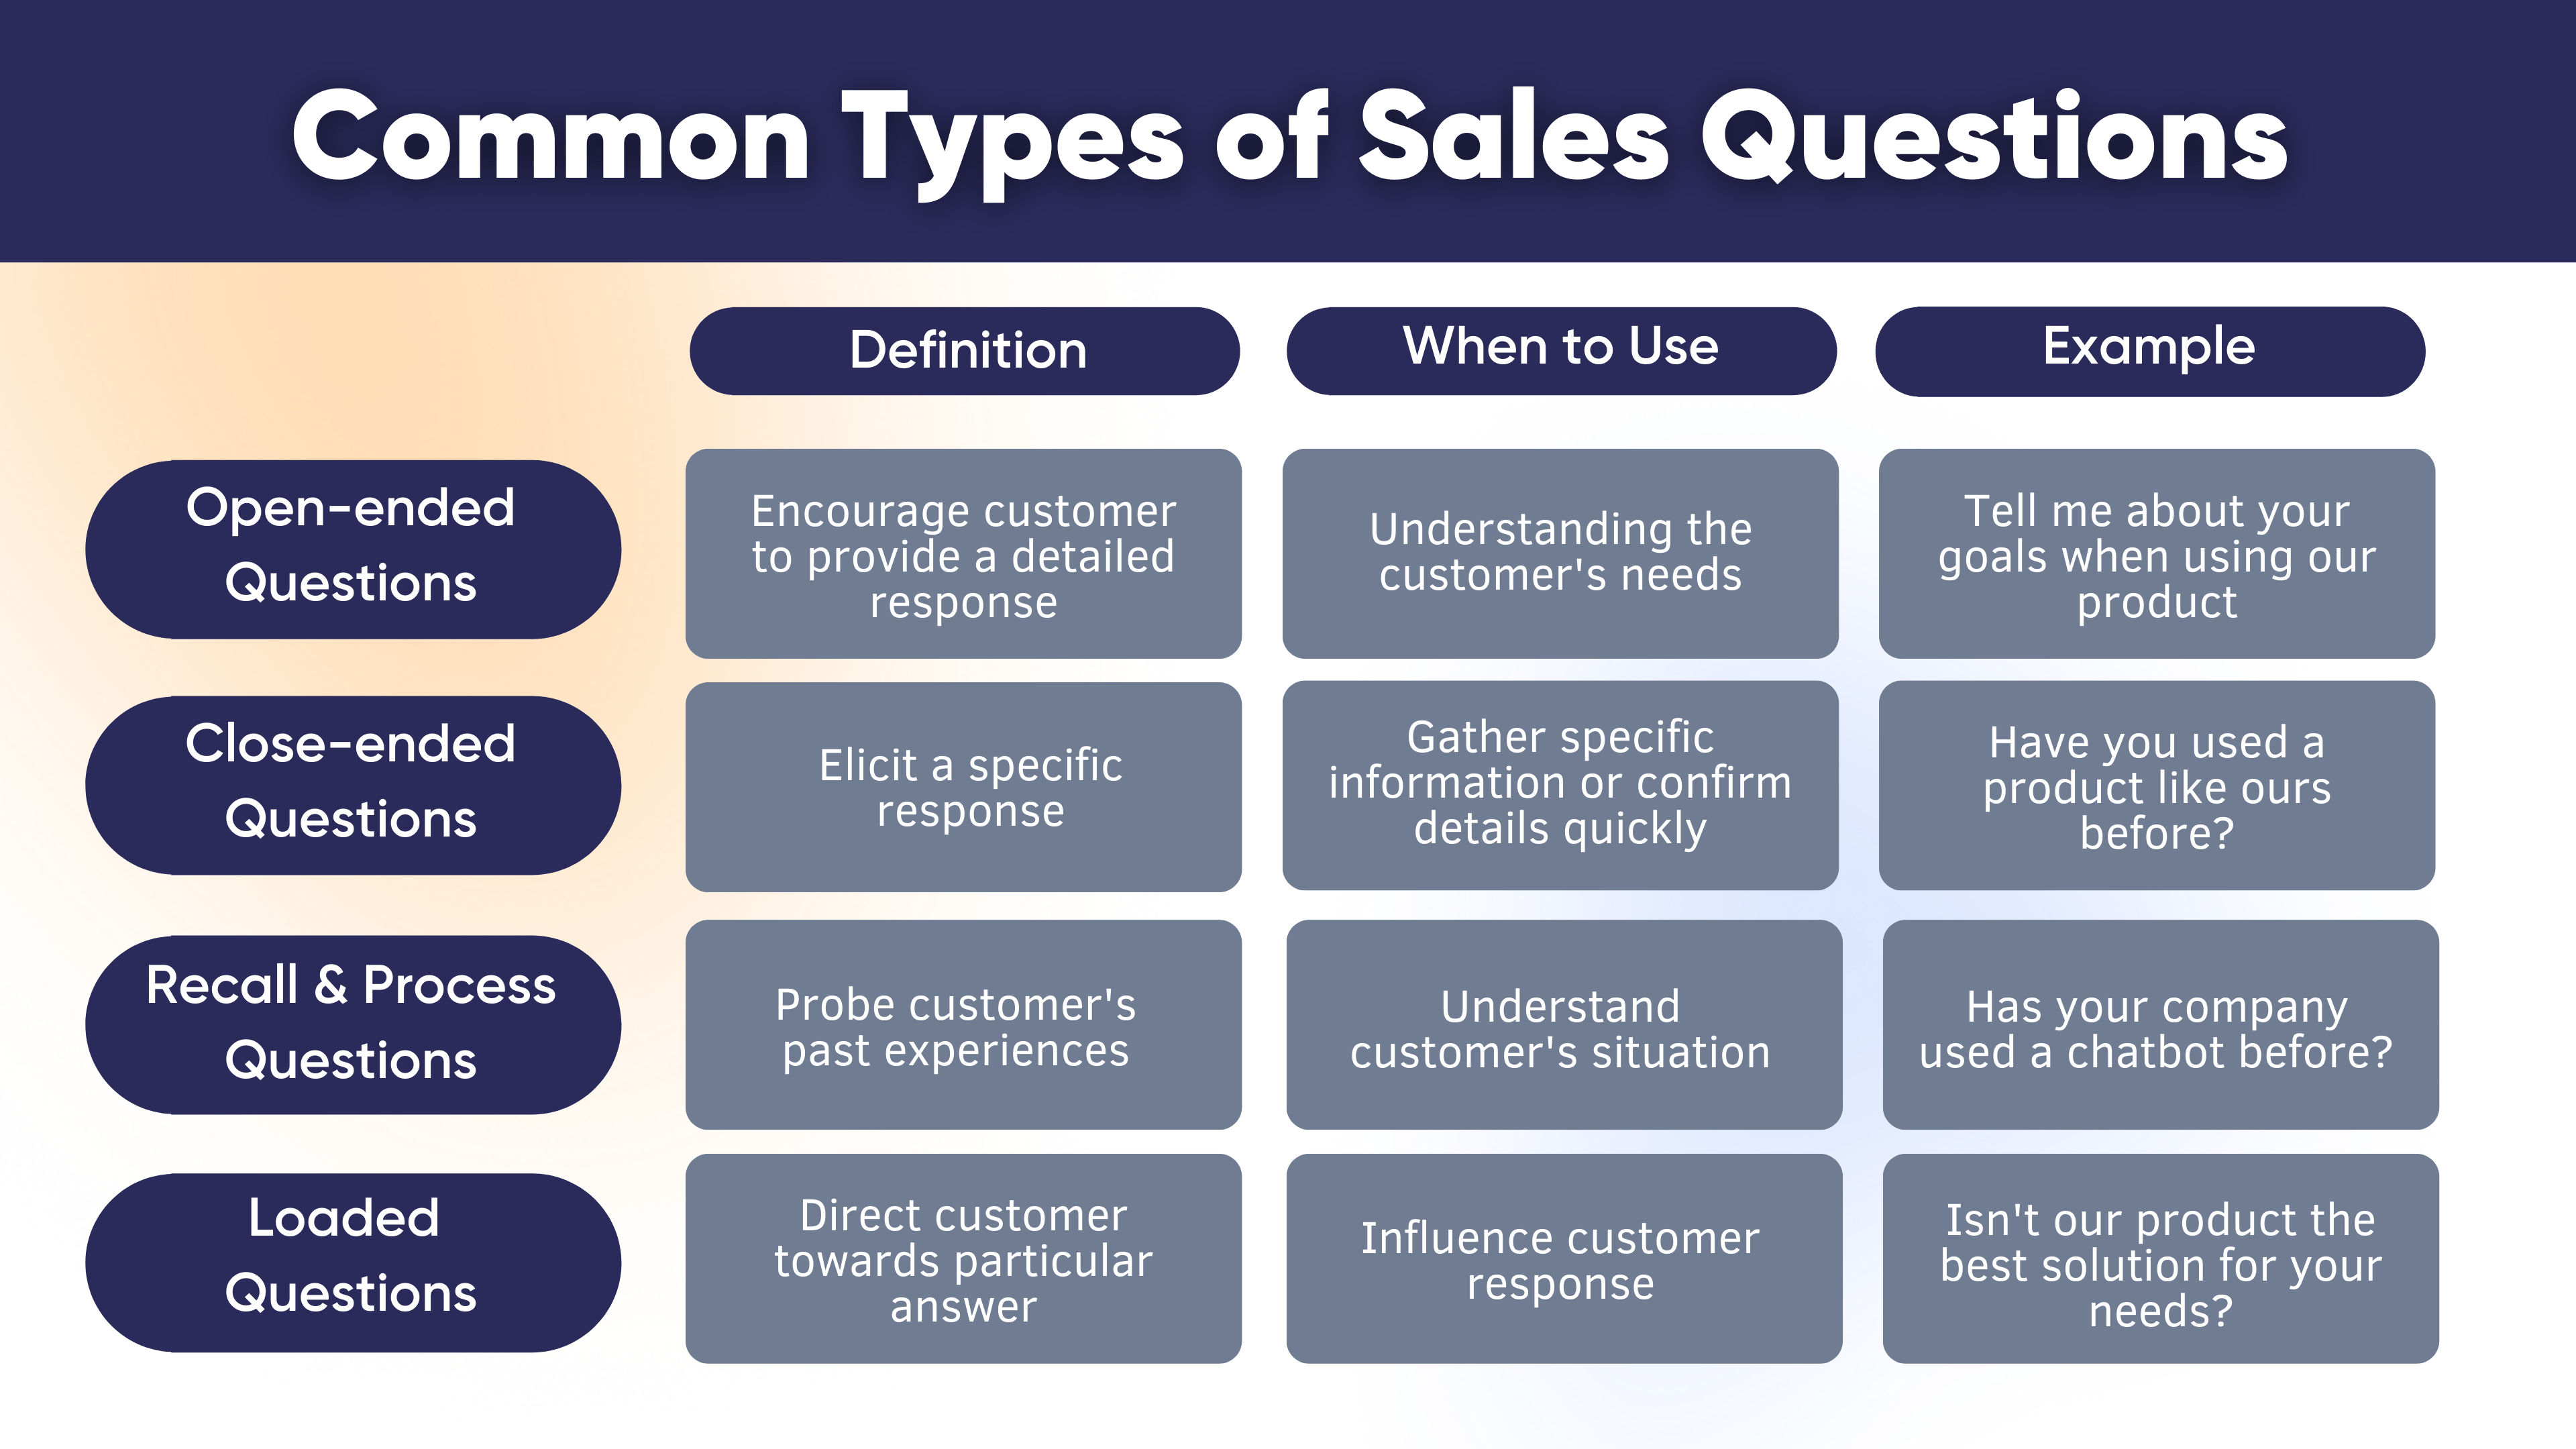 Common Types of Sales Questions